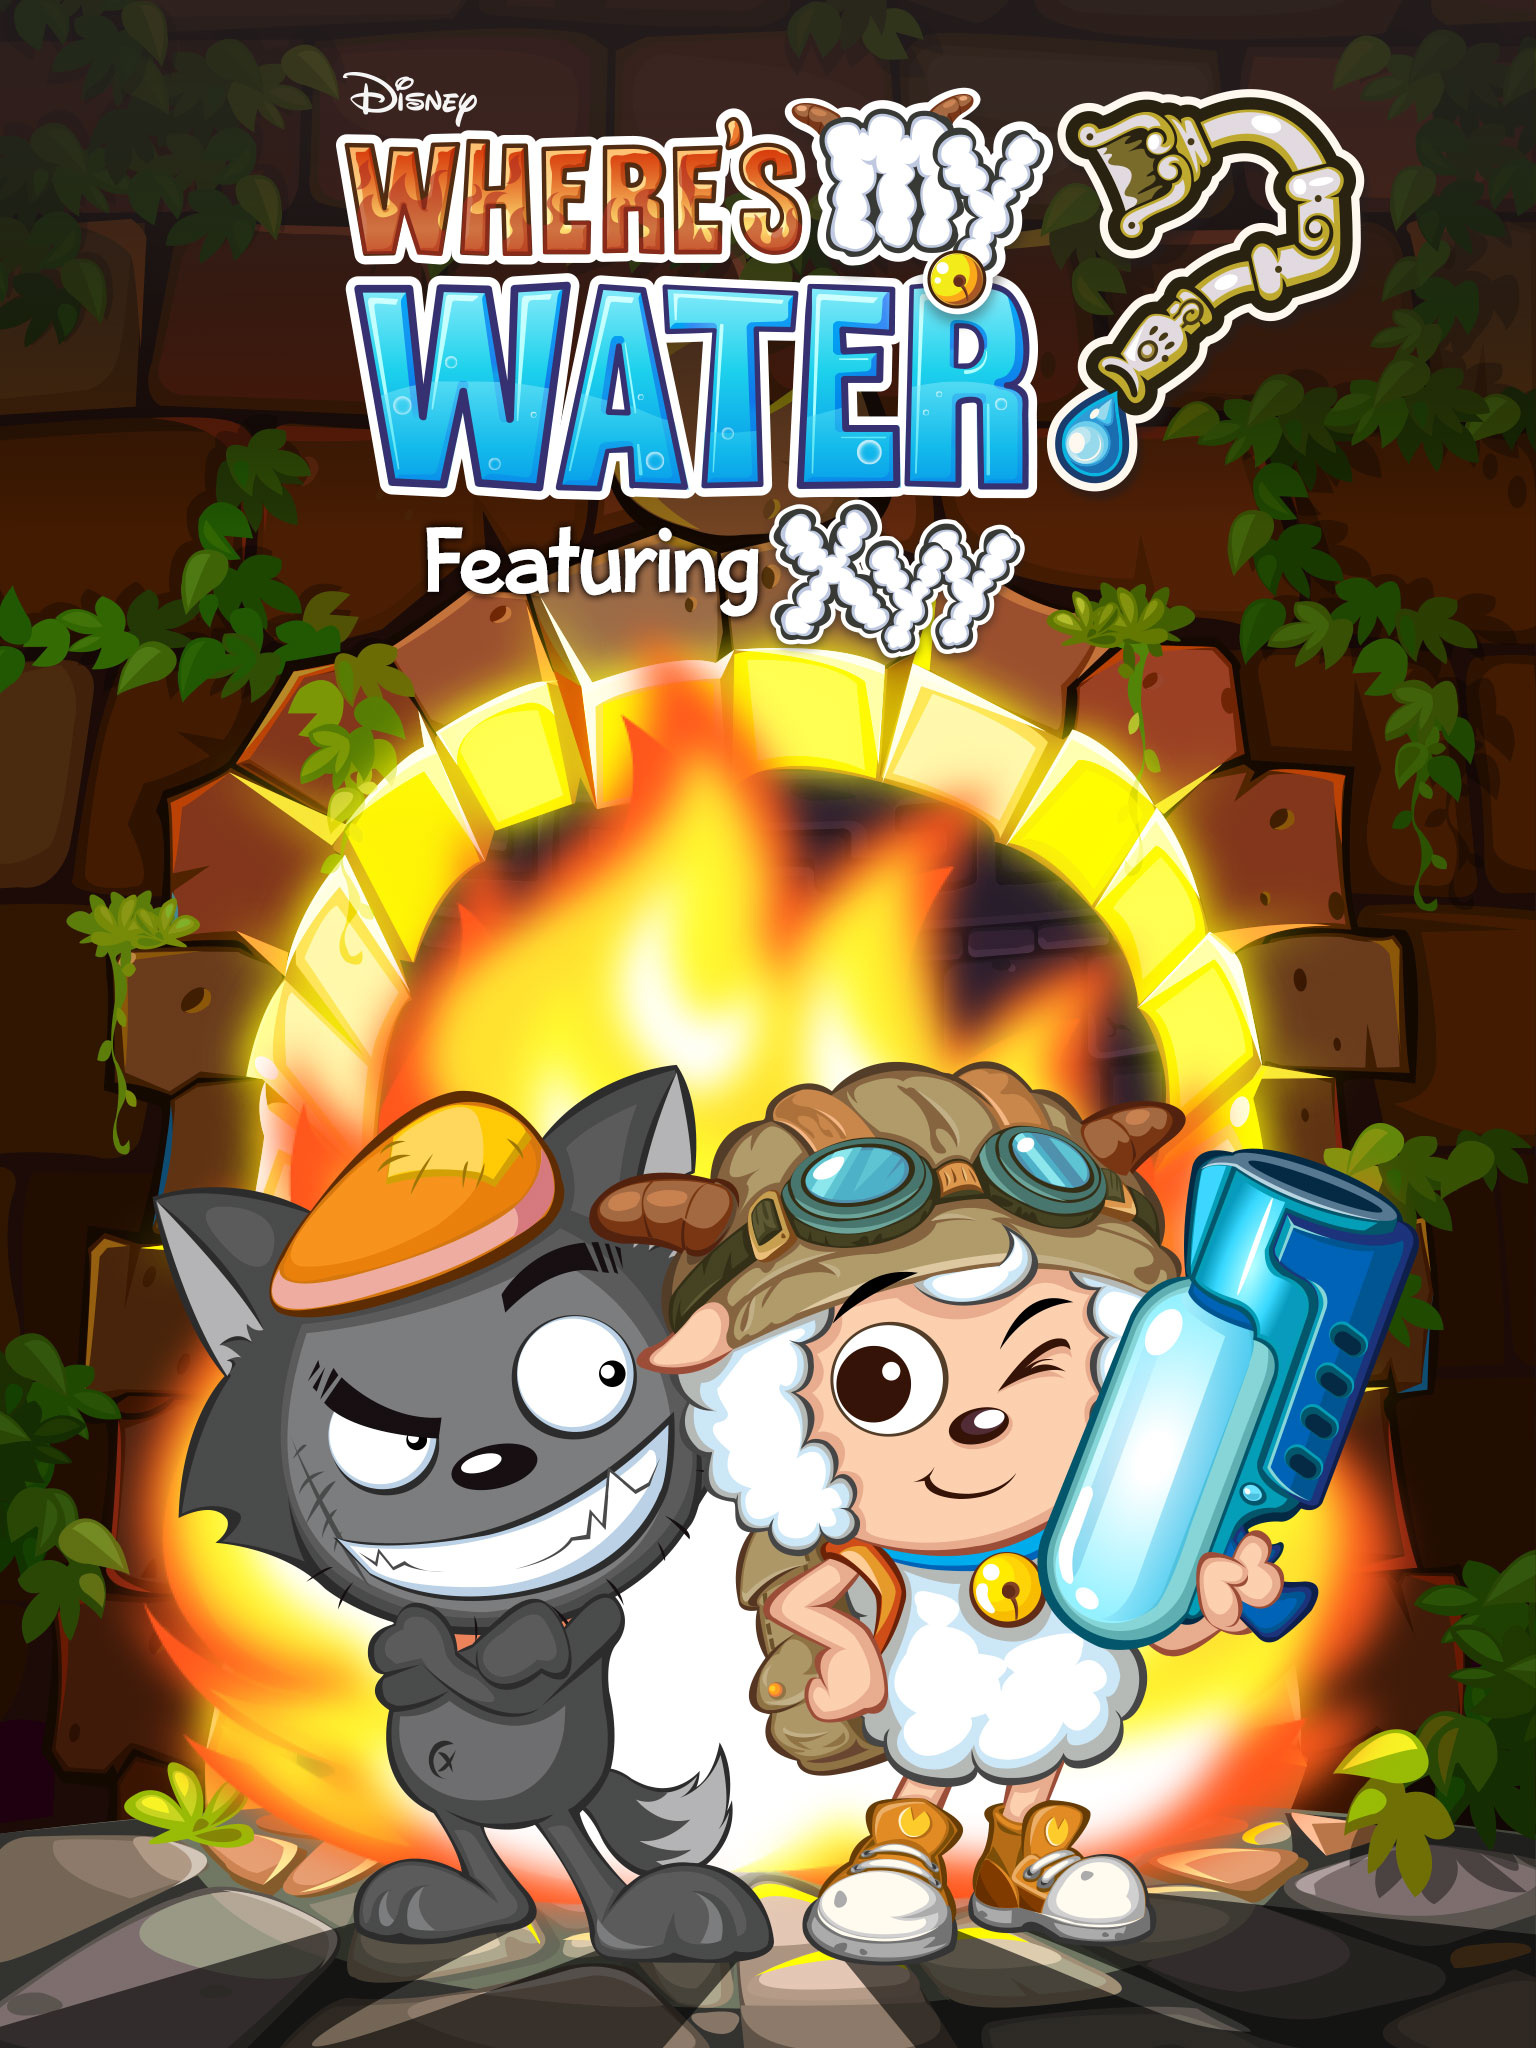 Star of popular Chinese Cartoon Joins Disney’s Hit Mobile Game Franchise in “Where’s My Water? Featuring XYY”